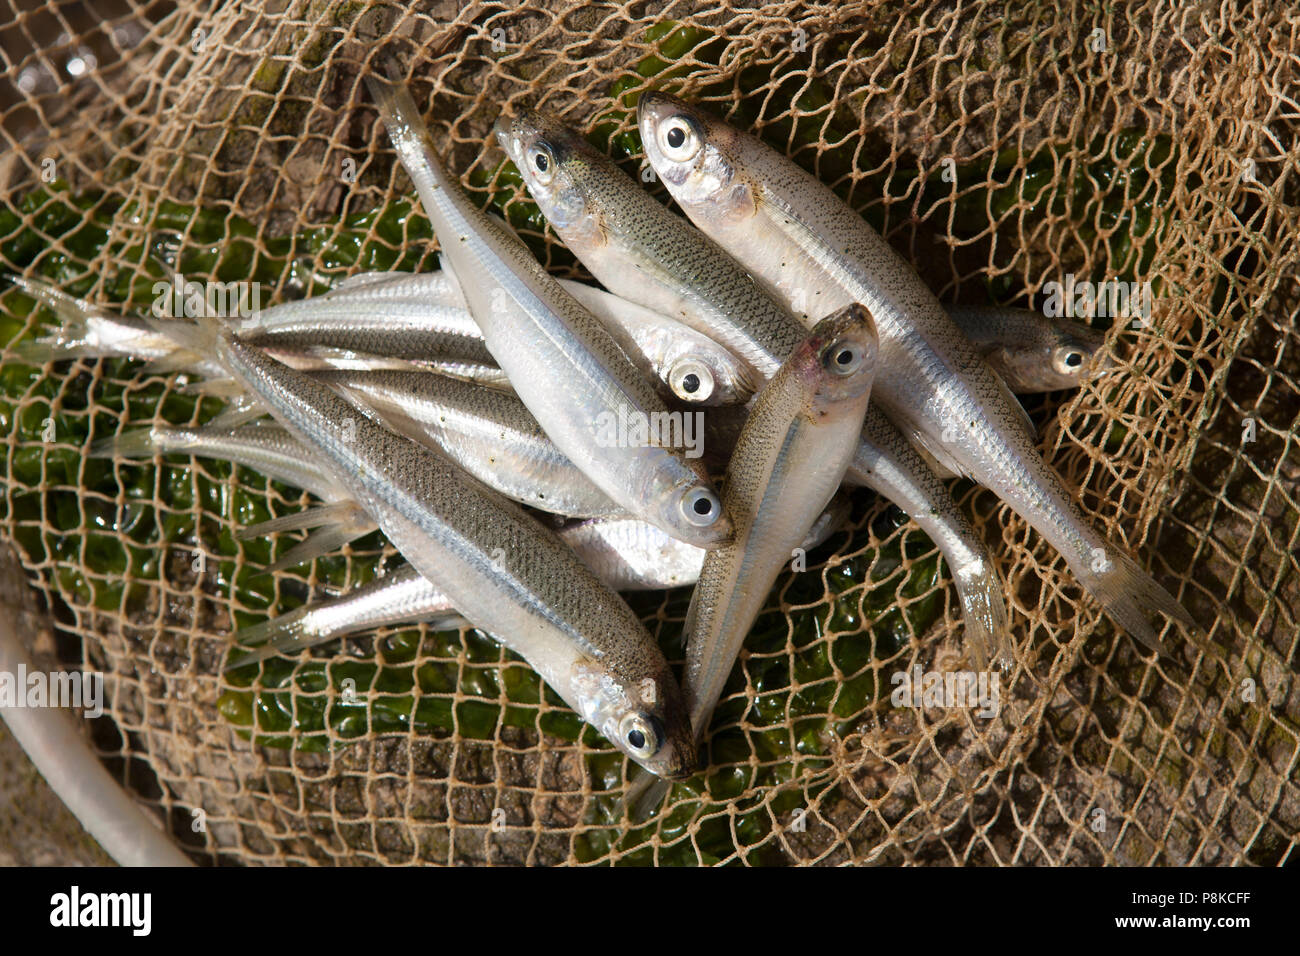 Sand smelts, Atherina presbyter, that have been caught with rod and line from a pier and displayed in a drop net. They can be deep fried or used as ba Stock Photo